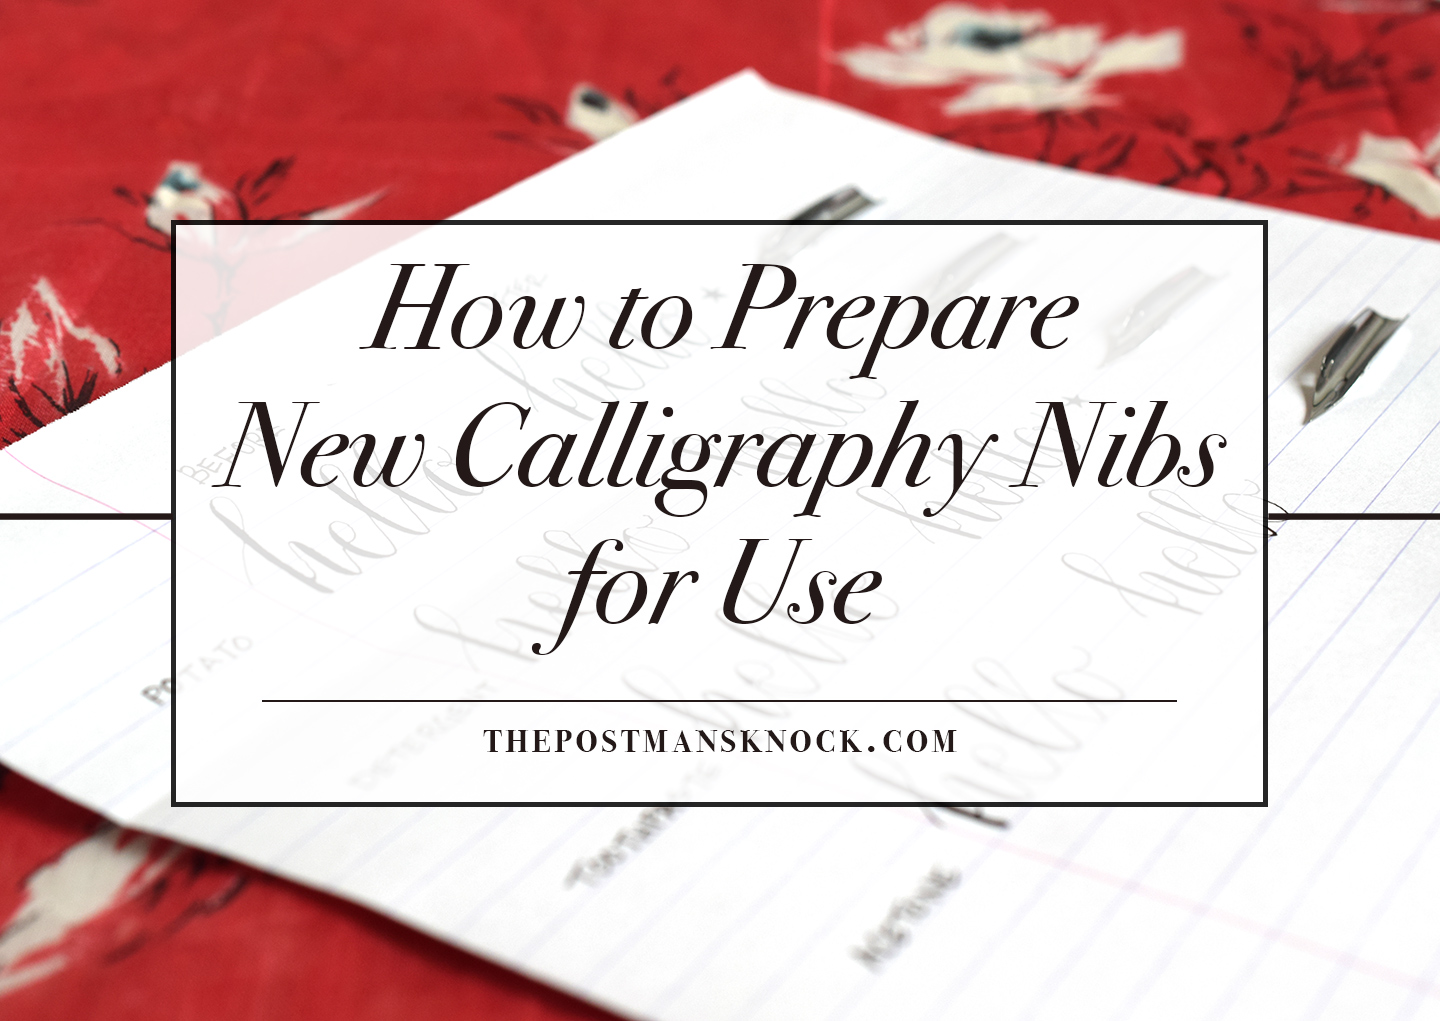 How to Prepare New Calligraphy Nibs for Use